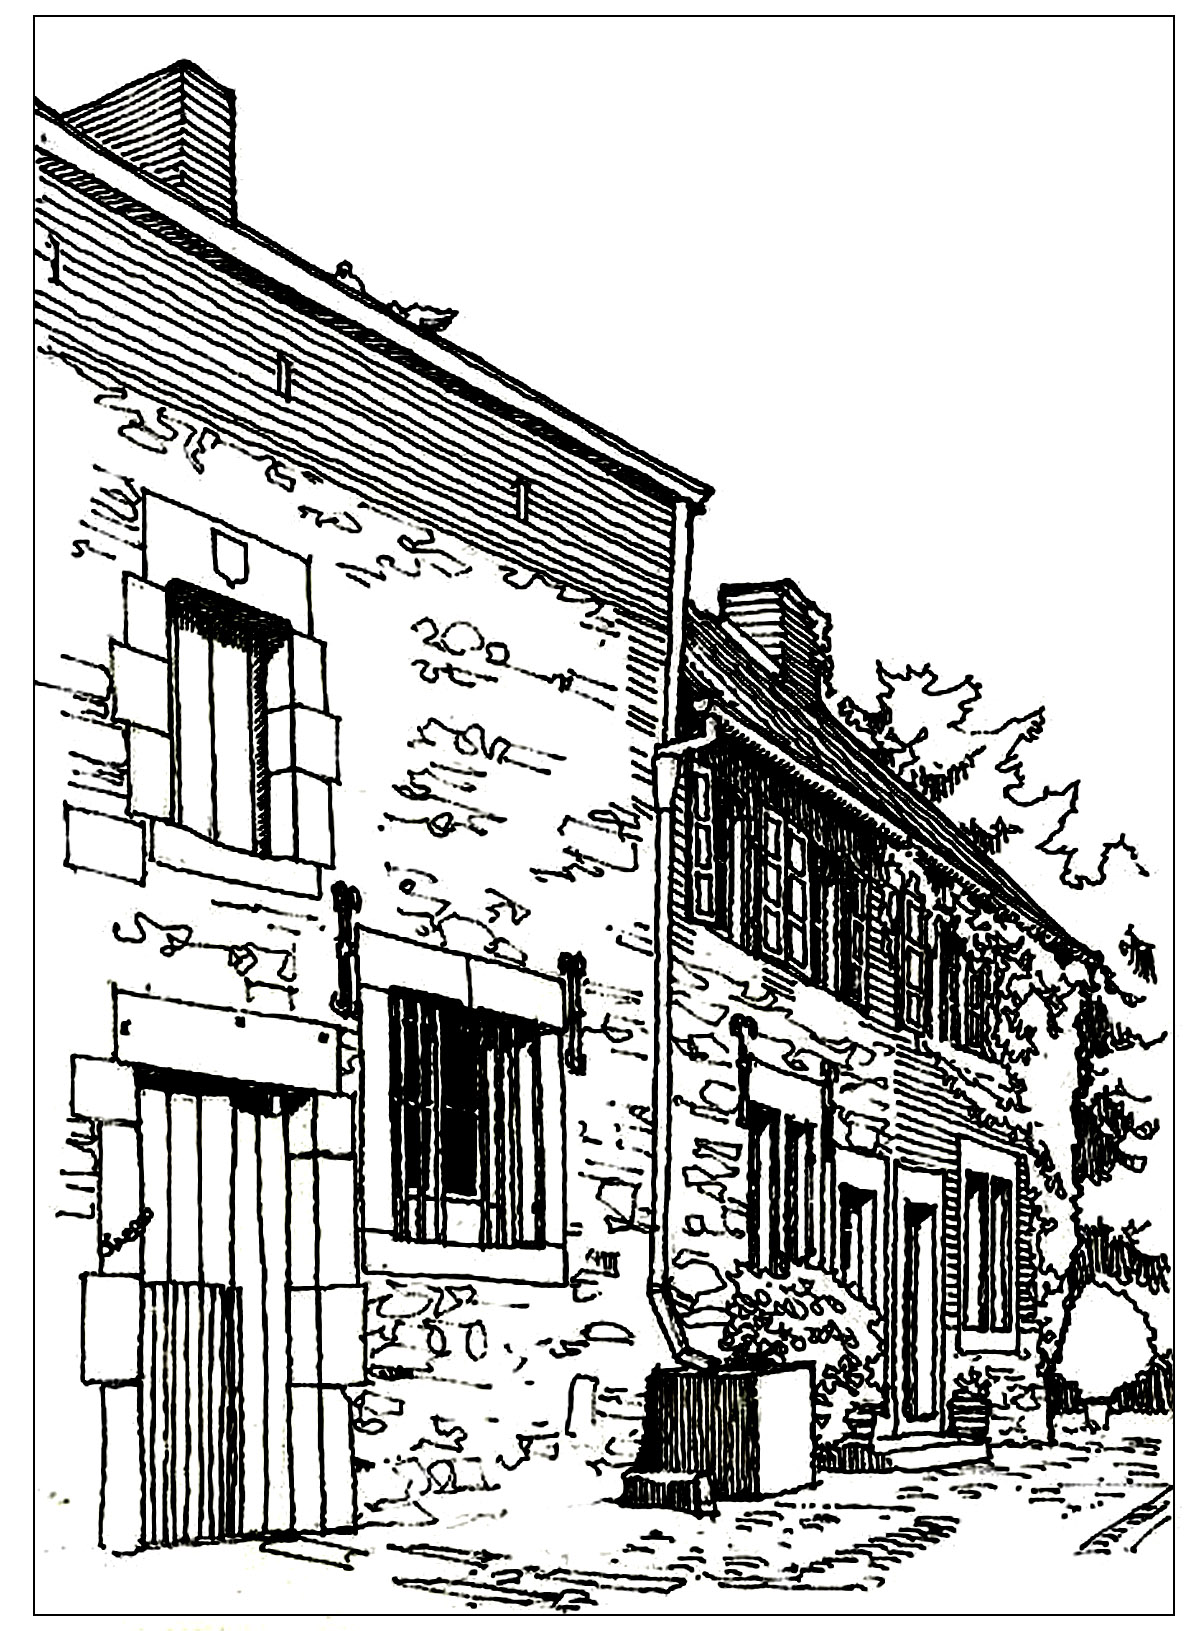 Coloring page of Typical houses in France